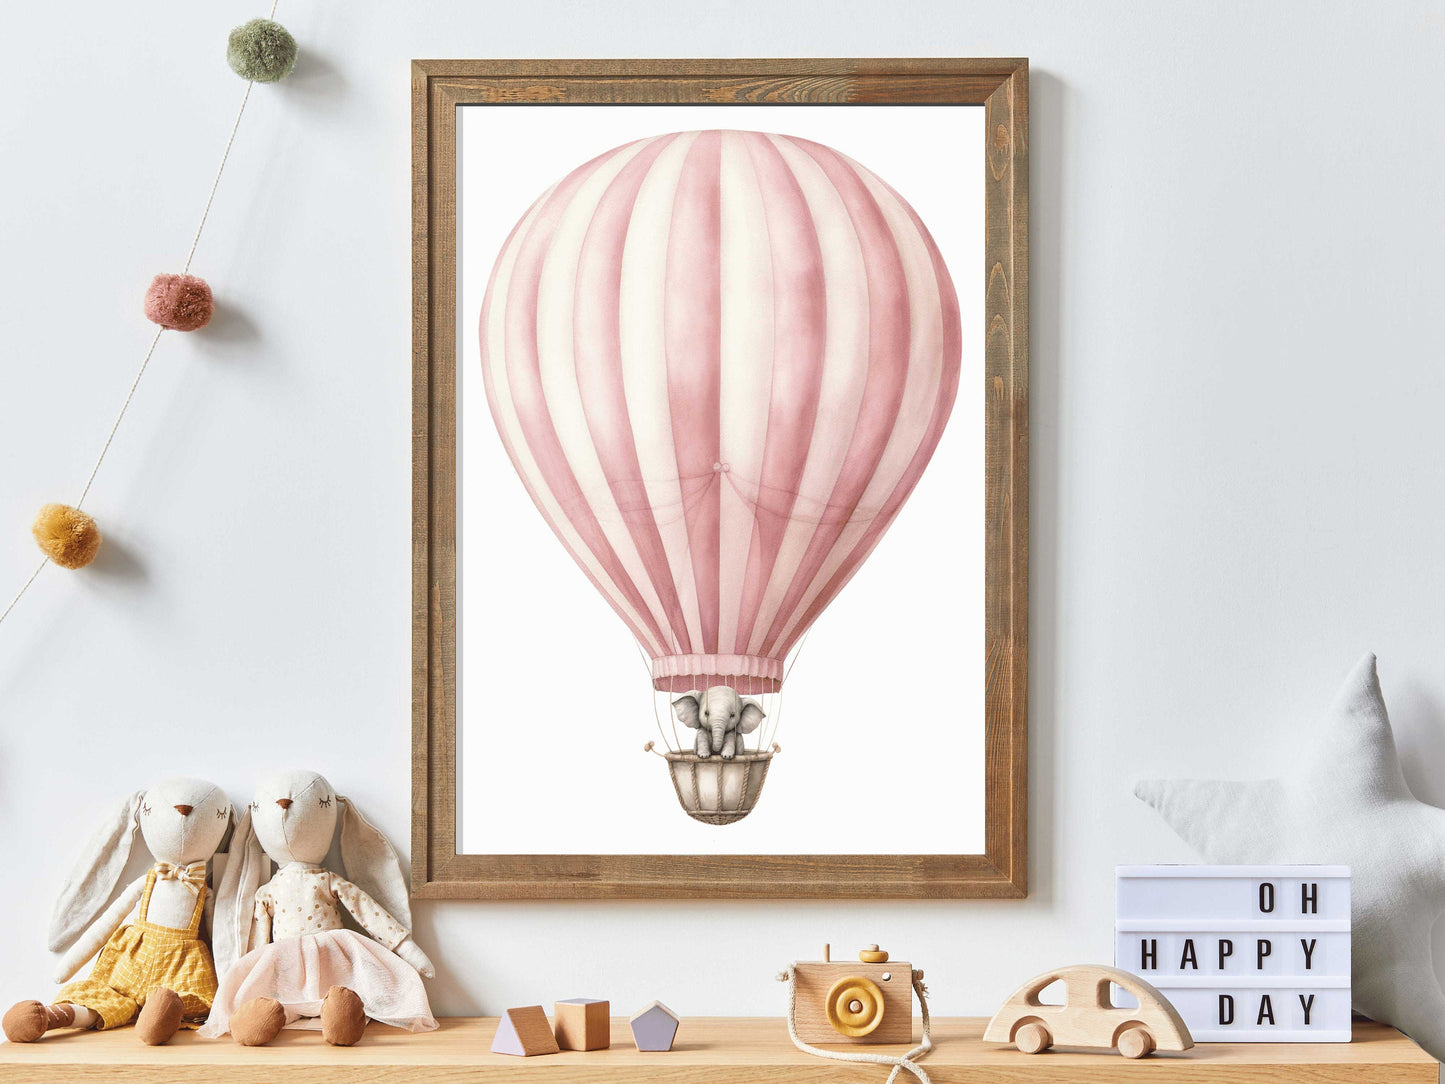 Up & Away: Vintage Baby Elephant Hot Air Balloon Art - High-Res Digital Printable - Create a Whimsical Oasis for Your Little One!